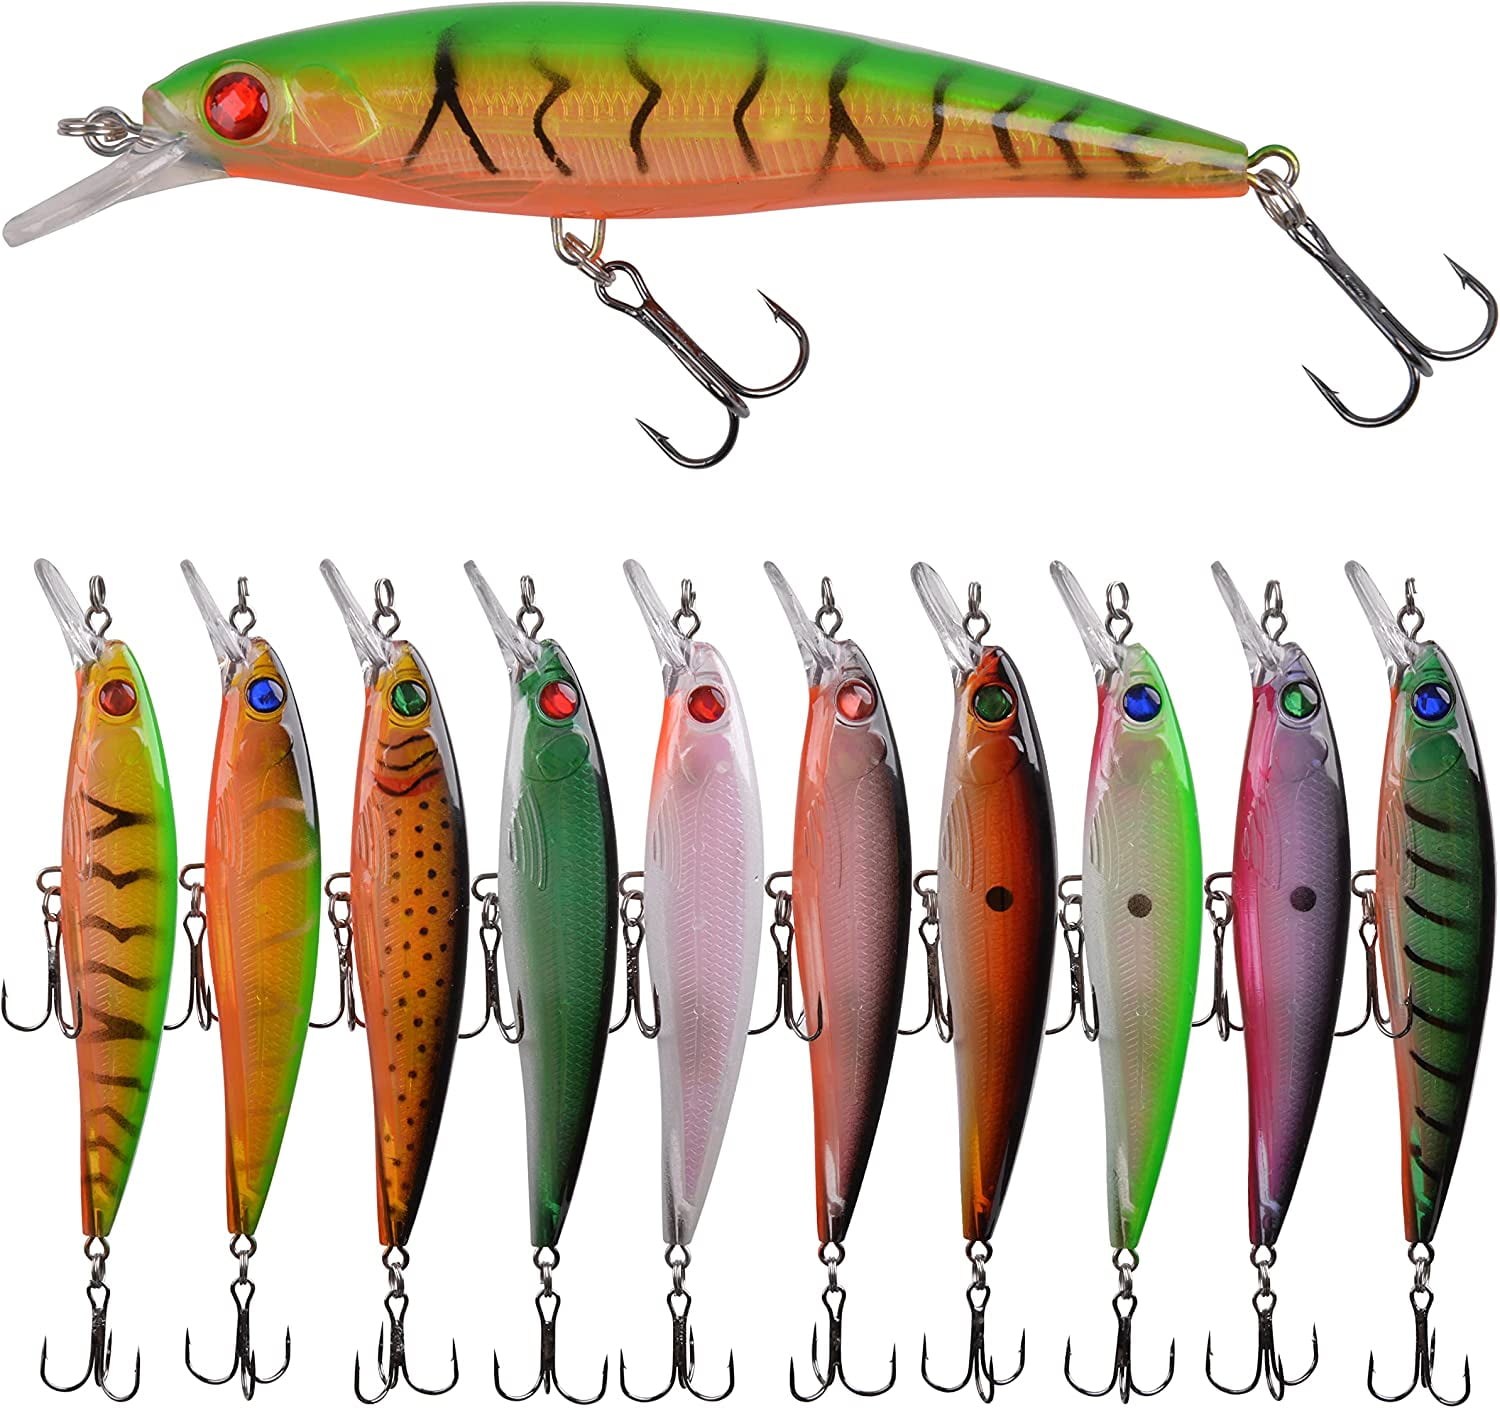 10pcs/lot Hard Minnow Fishing Lures Bait Life-Like Swimbait Bass Crankbait  for Pikes/Trout/Walleye/Redfish Tackle with 3D Fishing Eyes Strong Treble  Hooks, Squid Lures -  Canada